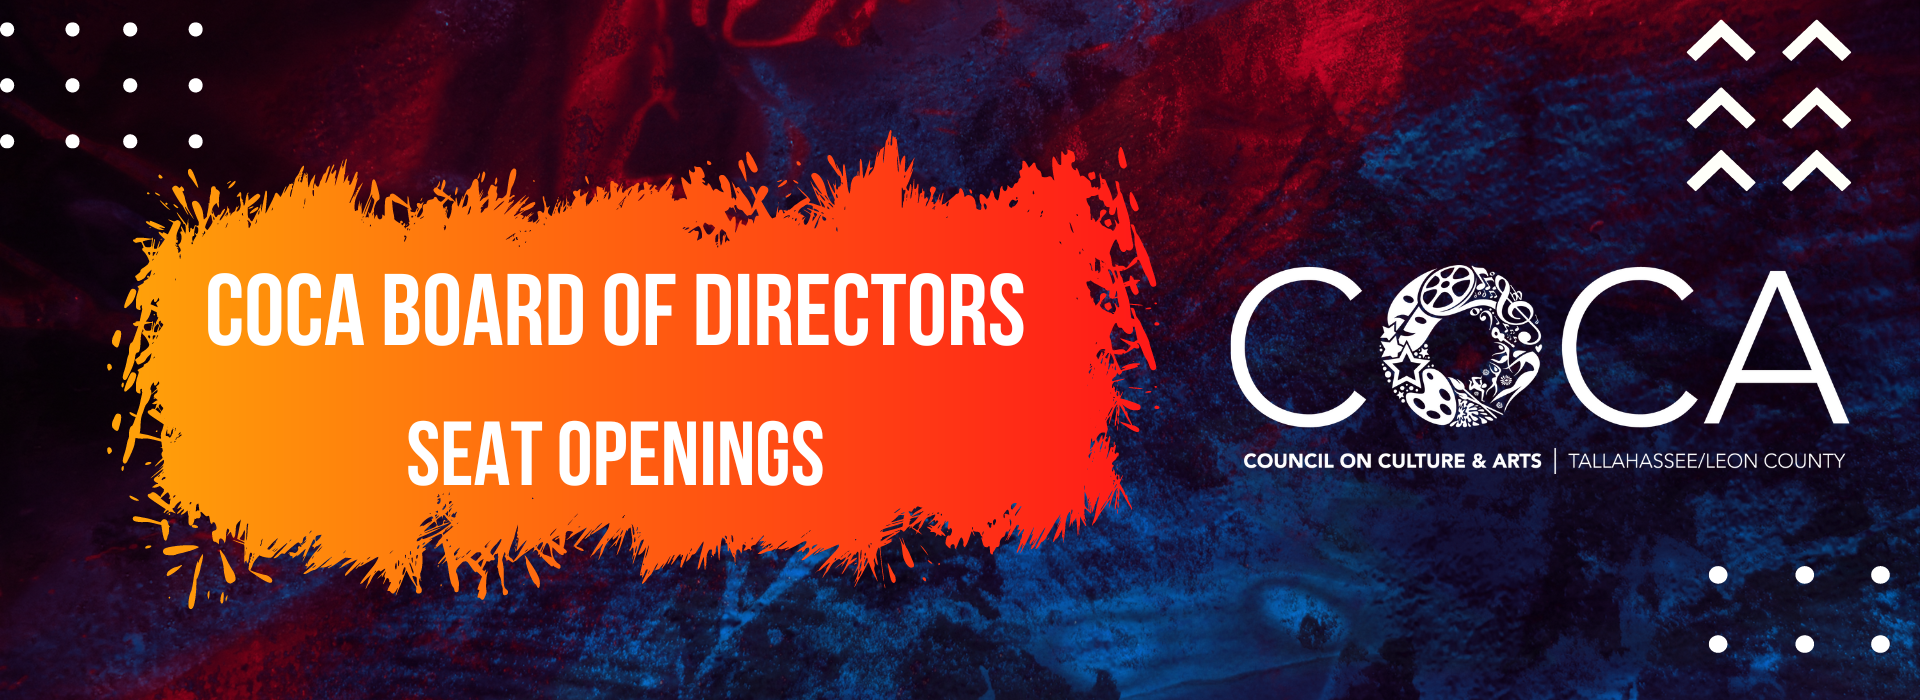 Join the COCA Board of Directors